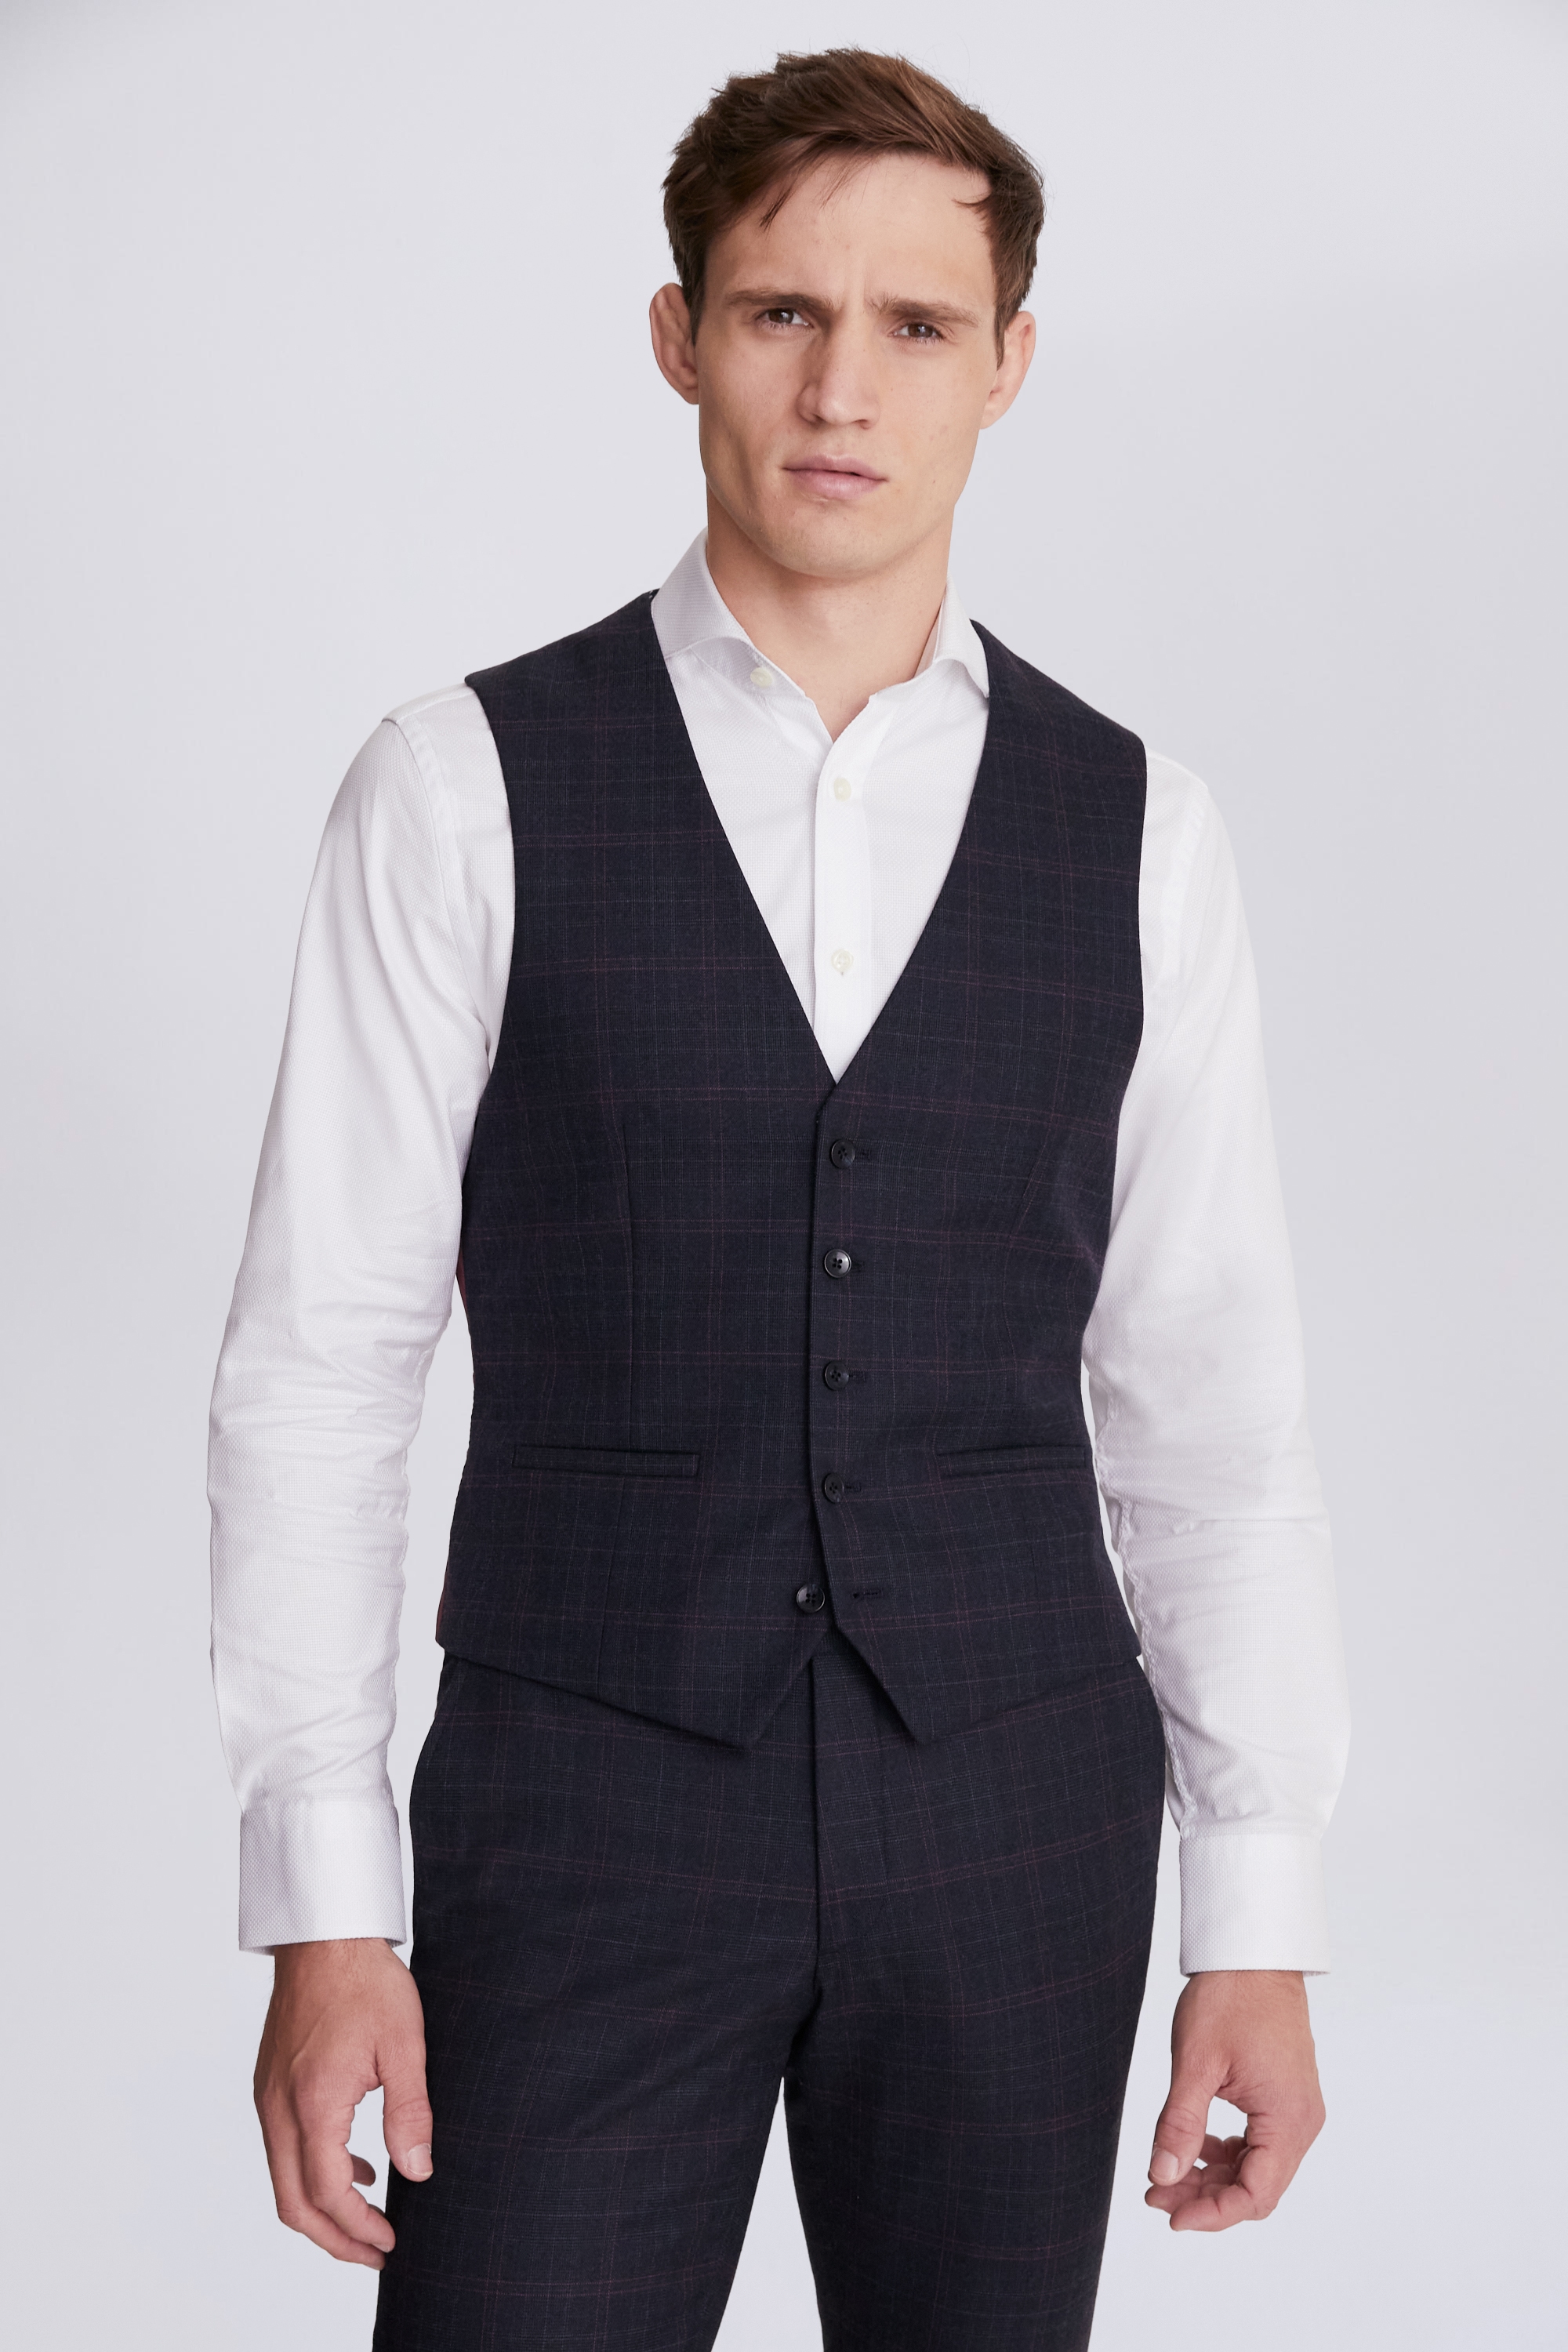 Slim Fit Navy Pink Check Waistcoat | Buy Online at Moss